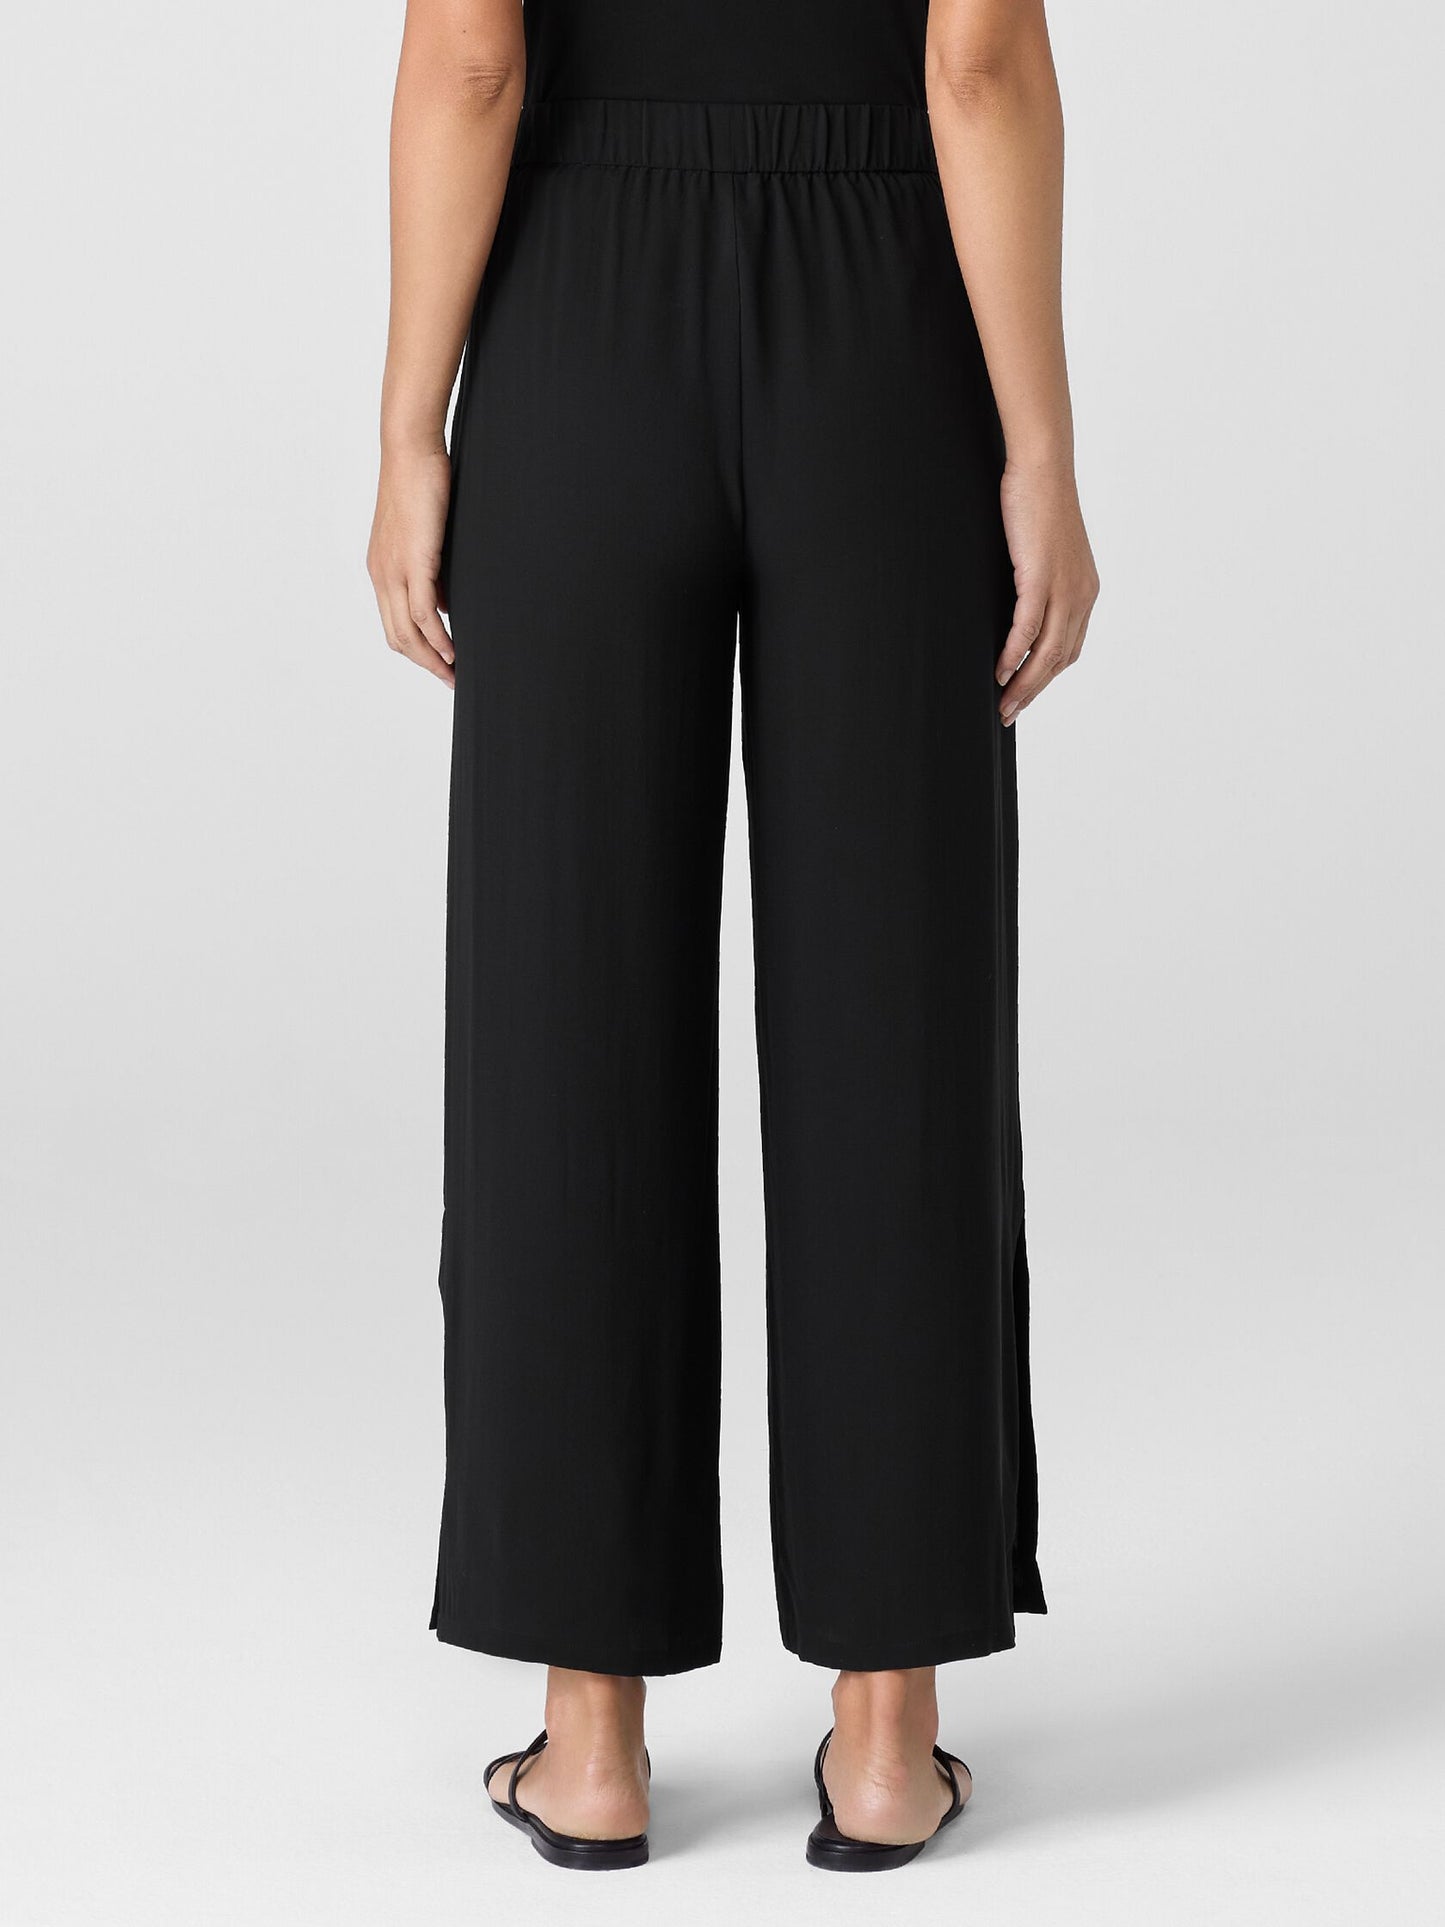 Eileen Fisher Silk Georgette Crepe Pant with Slits